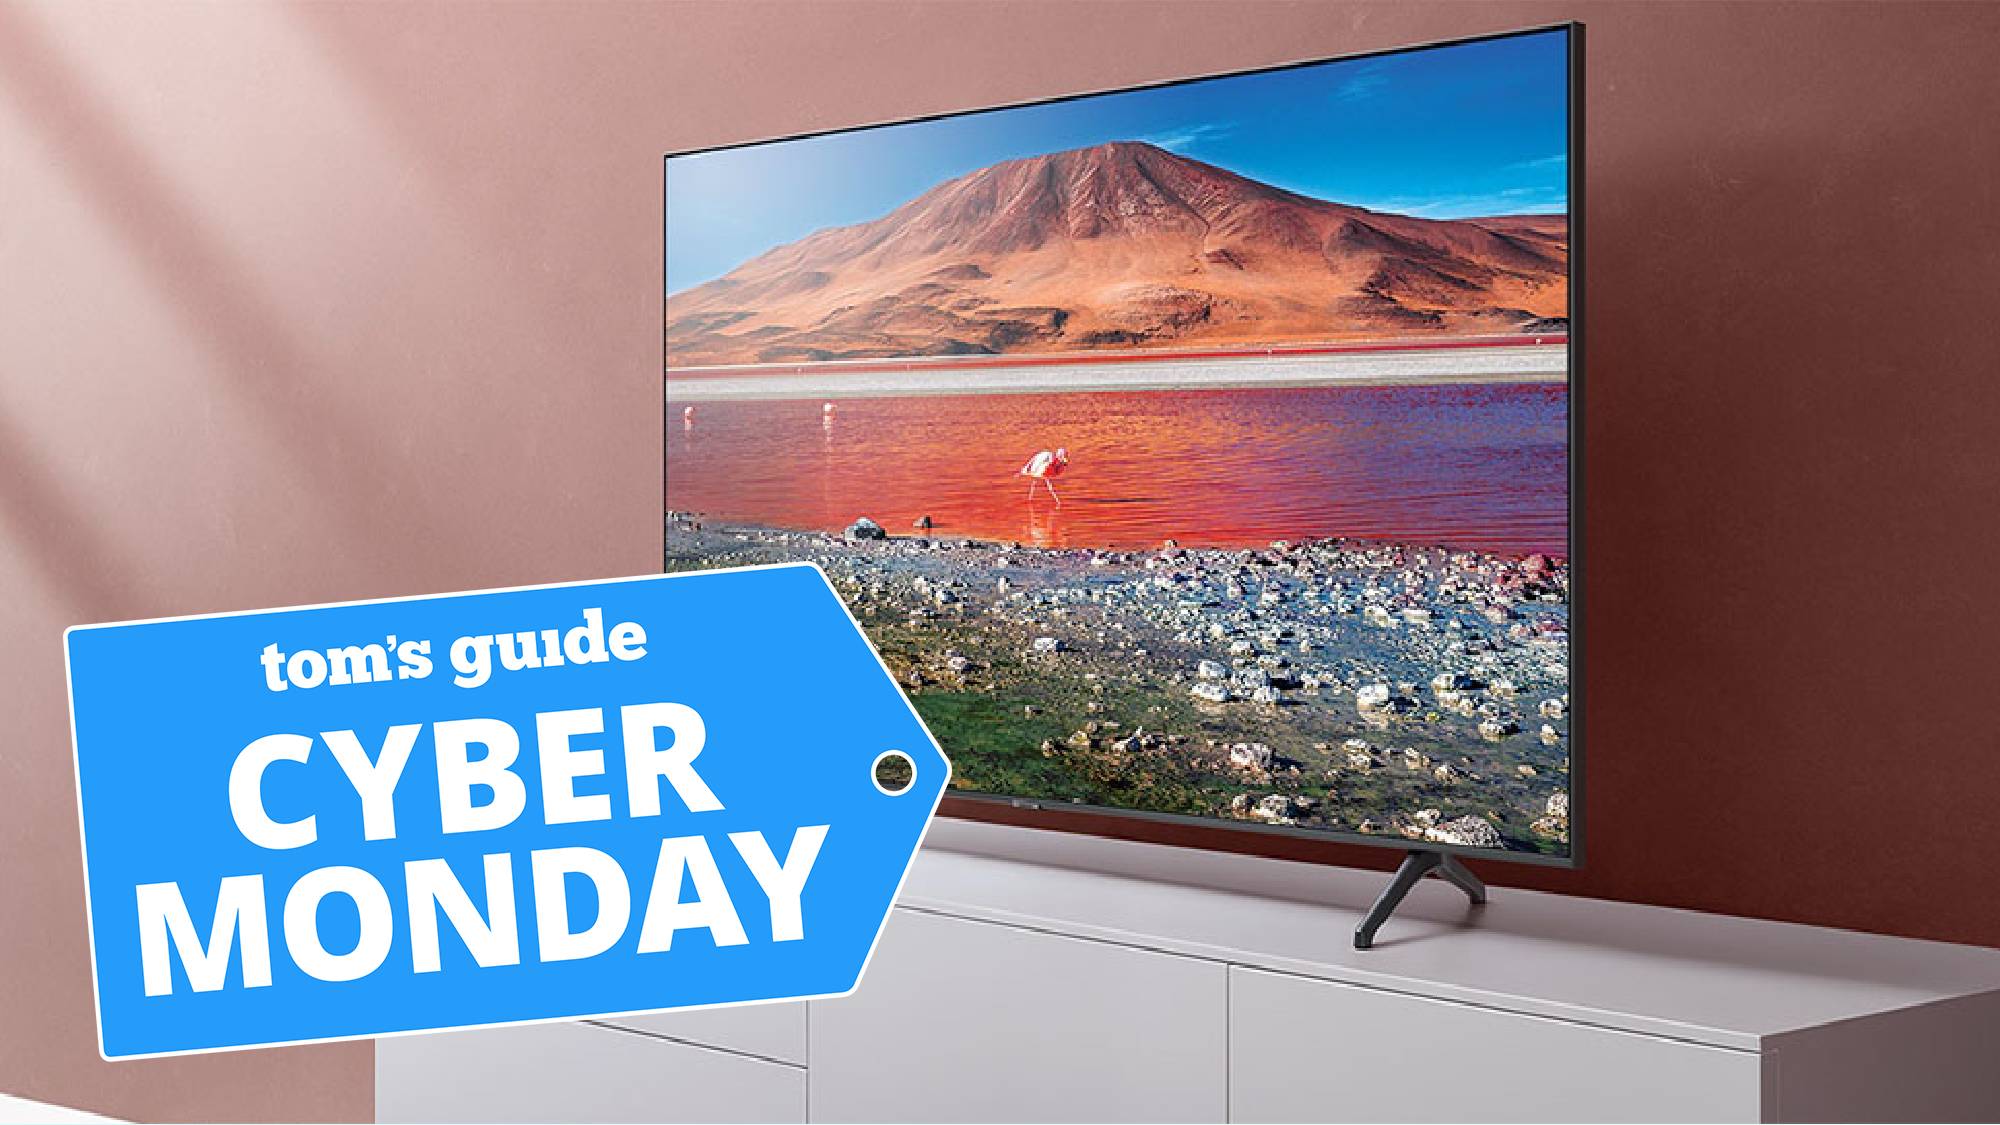 Samsung Crystal 4K TV with a Cyber Monday deal tag